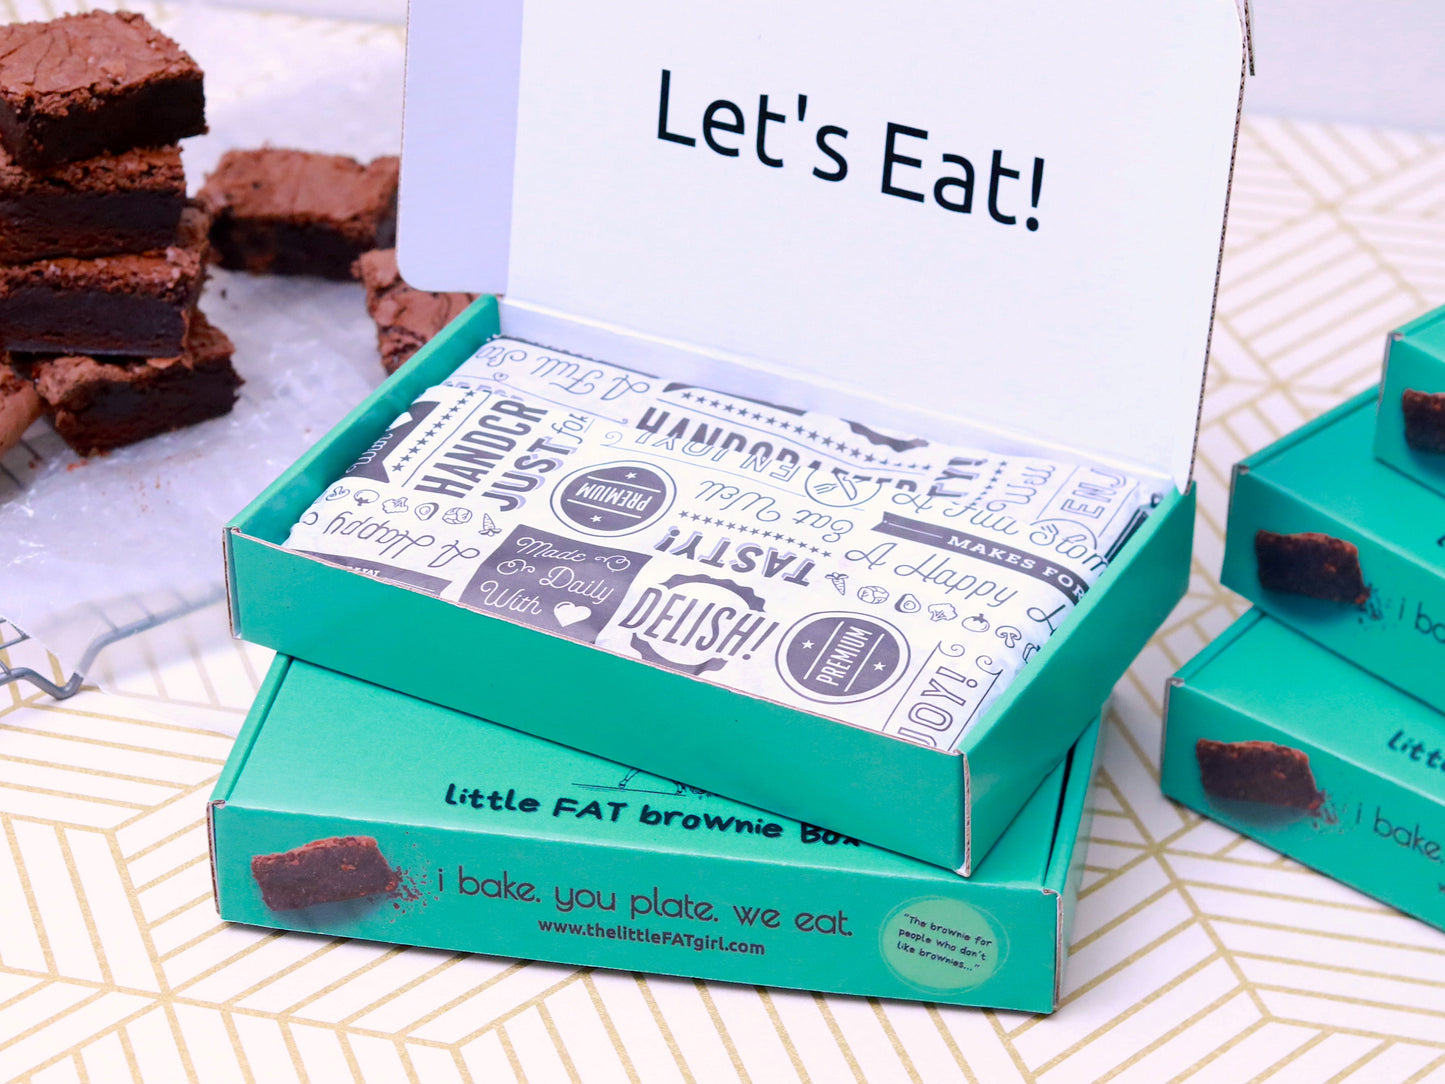 the little FAT brownie box